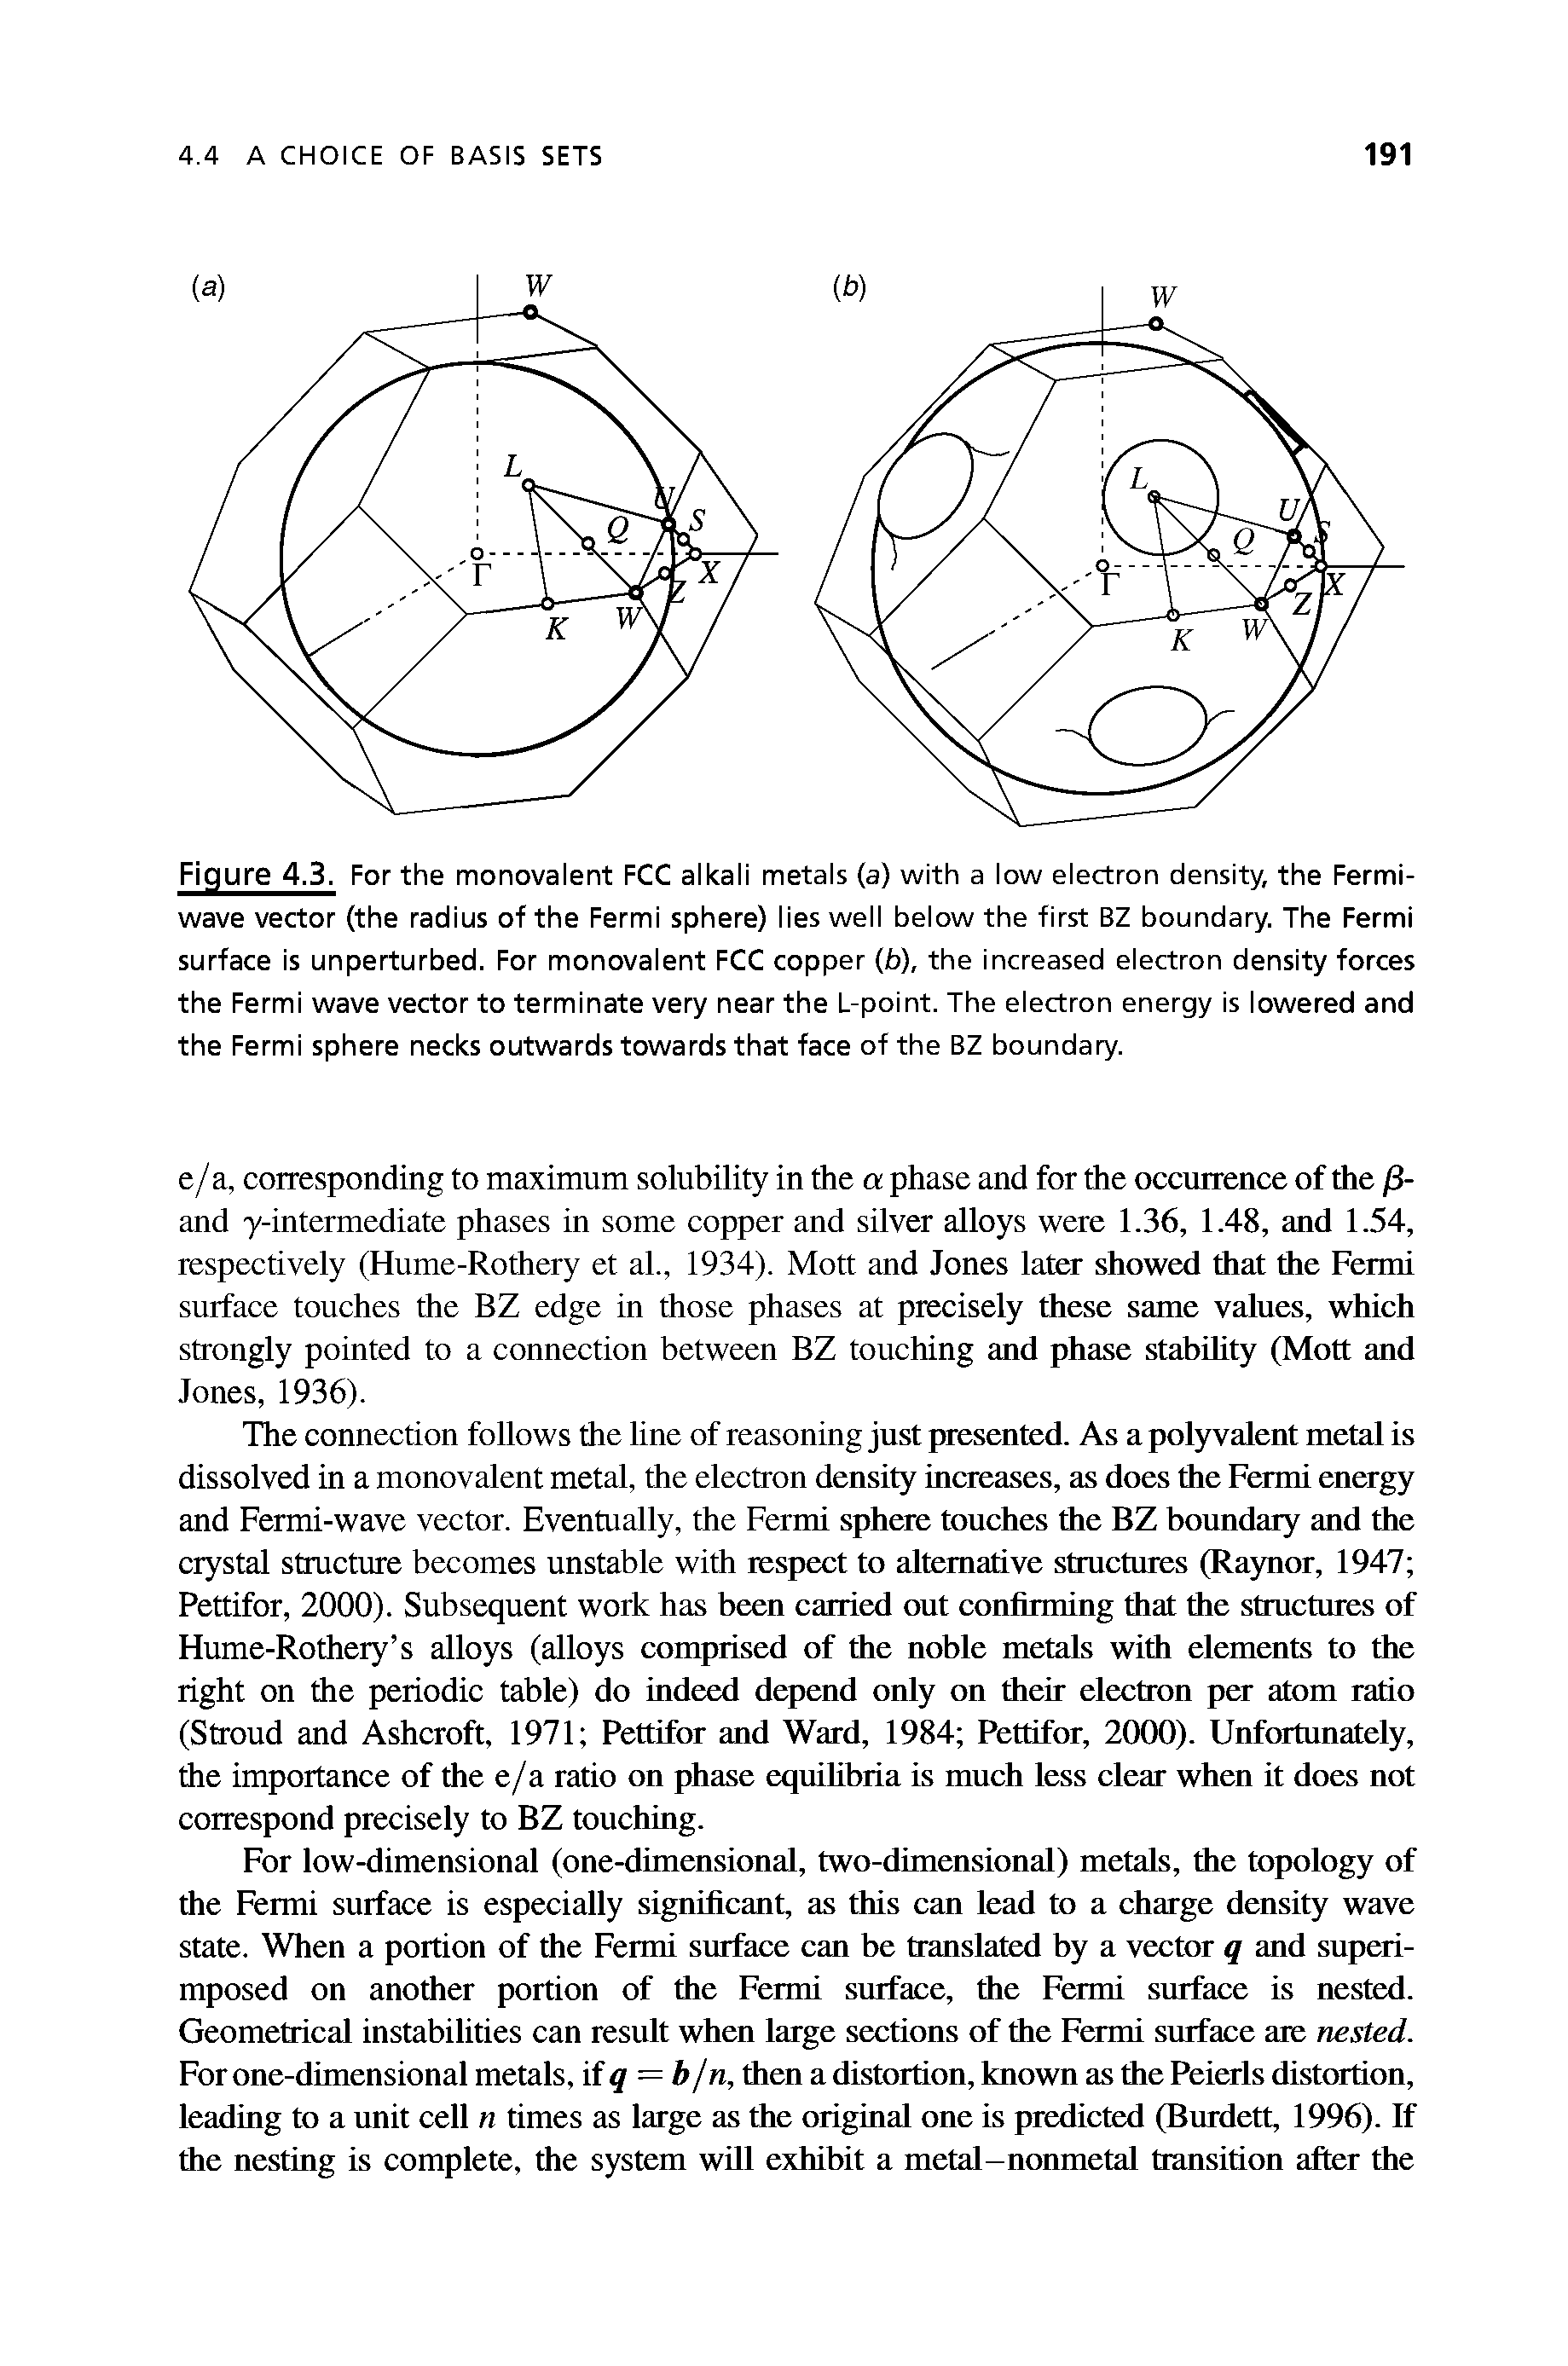 Figure 4.3. For the monovalent FCC alkali metals (a) with a low electron density, the Fermi-wave vector (the radius of the Fermi sphere) lies well below the first BZ boundary. The Fermi surface is unperturbed. For monovalent FCC copper (b), the increased electron density forces the Fermi wave vector to terminate very near the L-point. The electron energy is lowered and the Fermi sphere necks outwards towards that face of the BZ boundary.